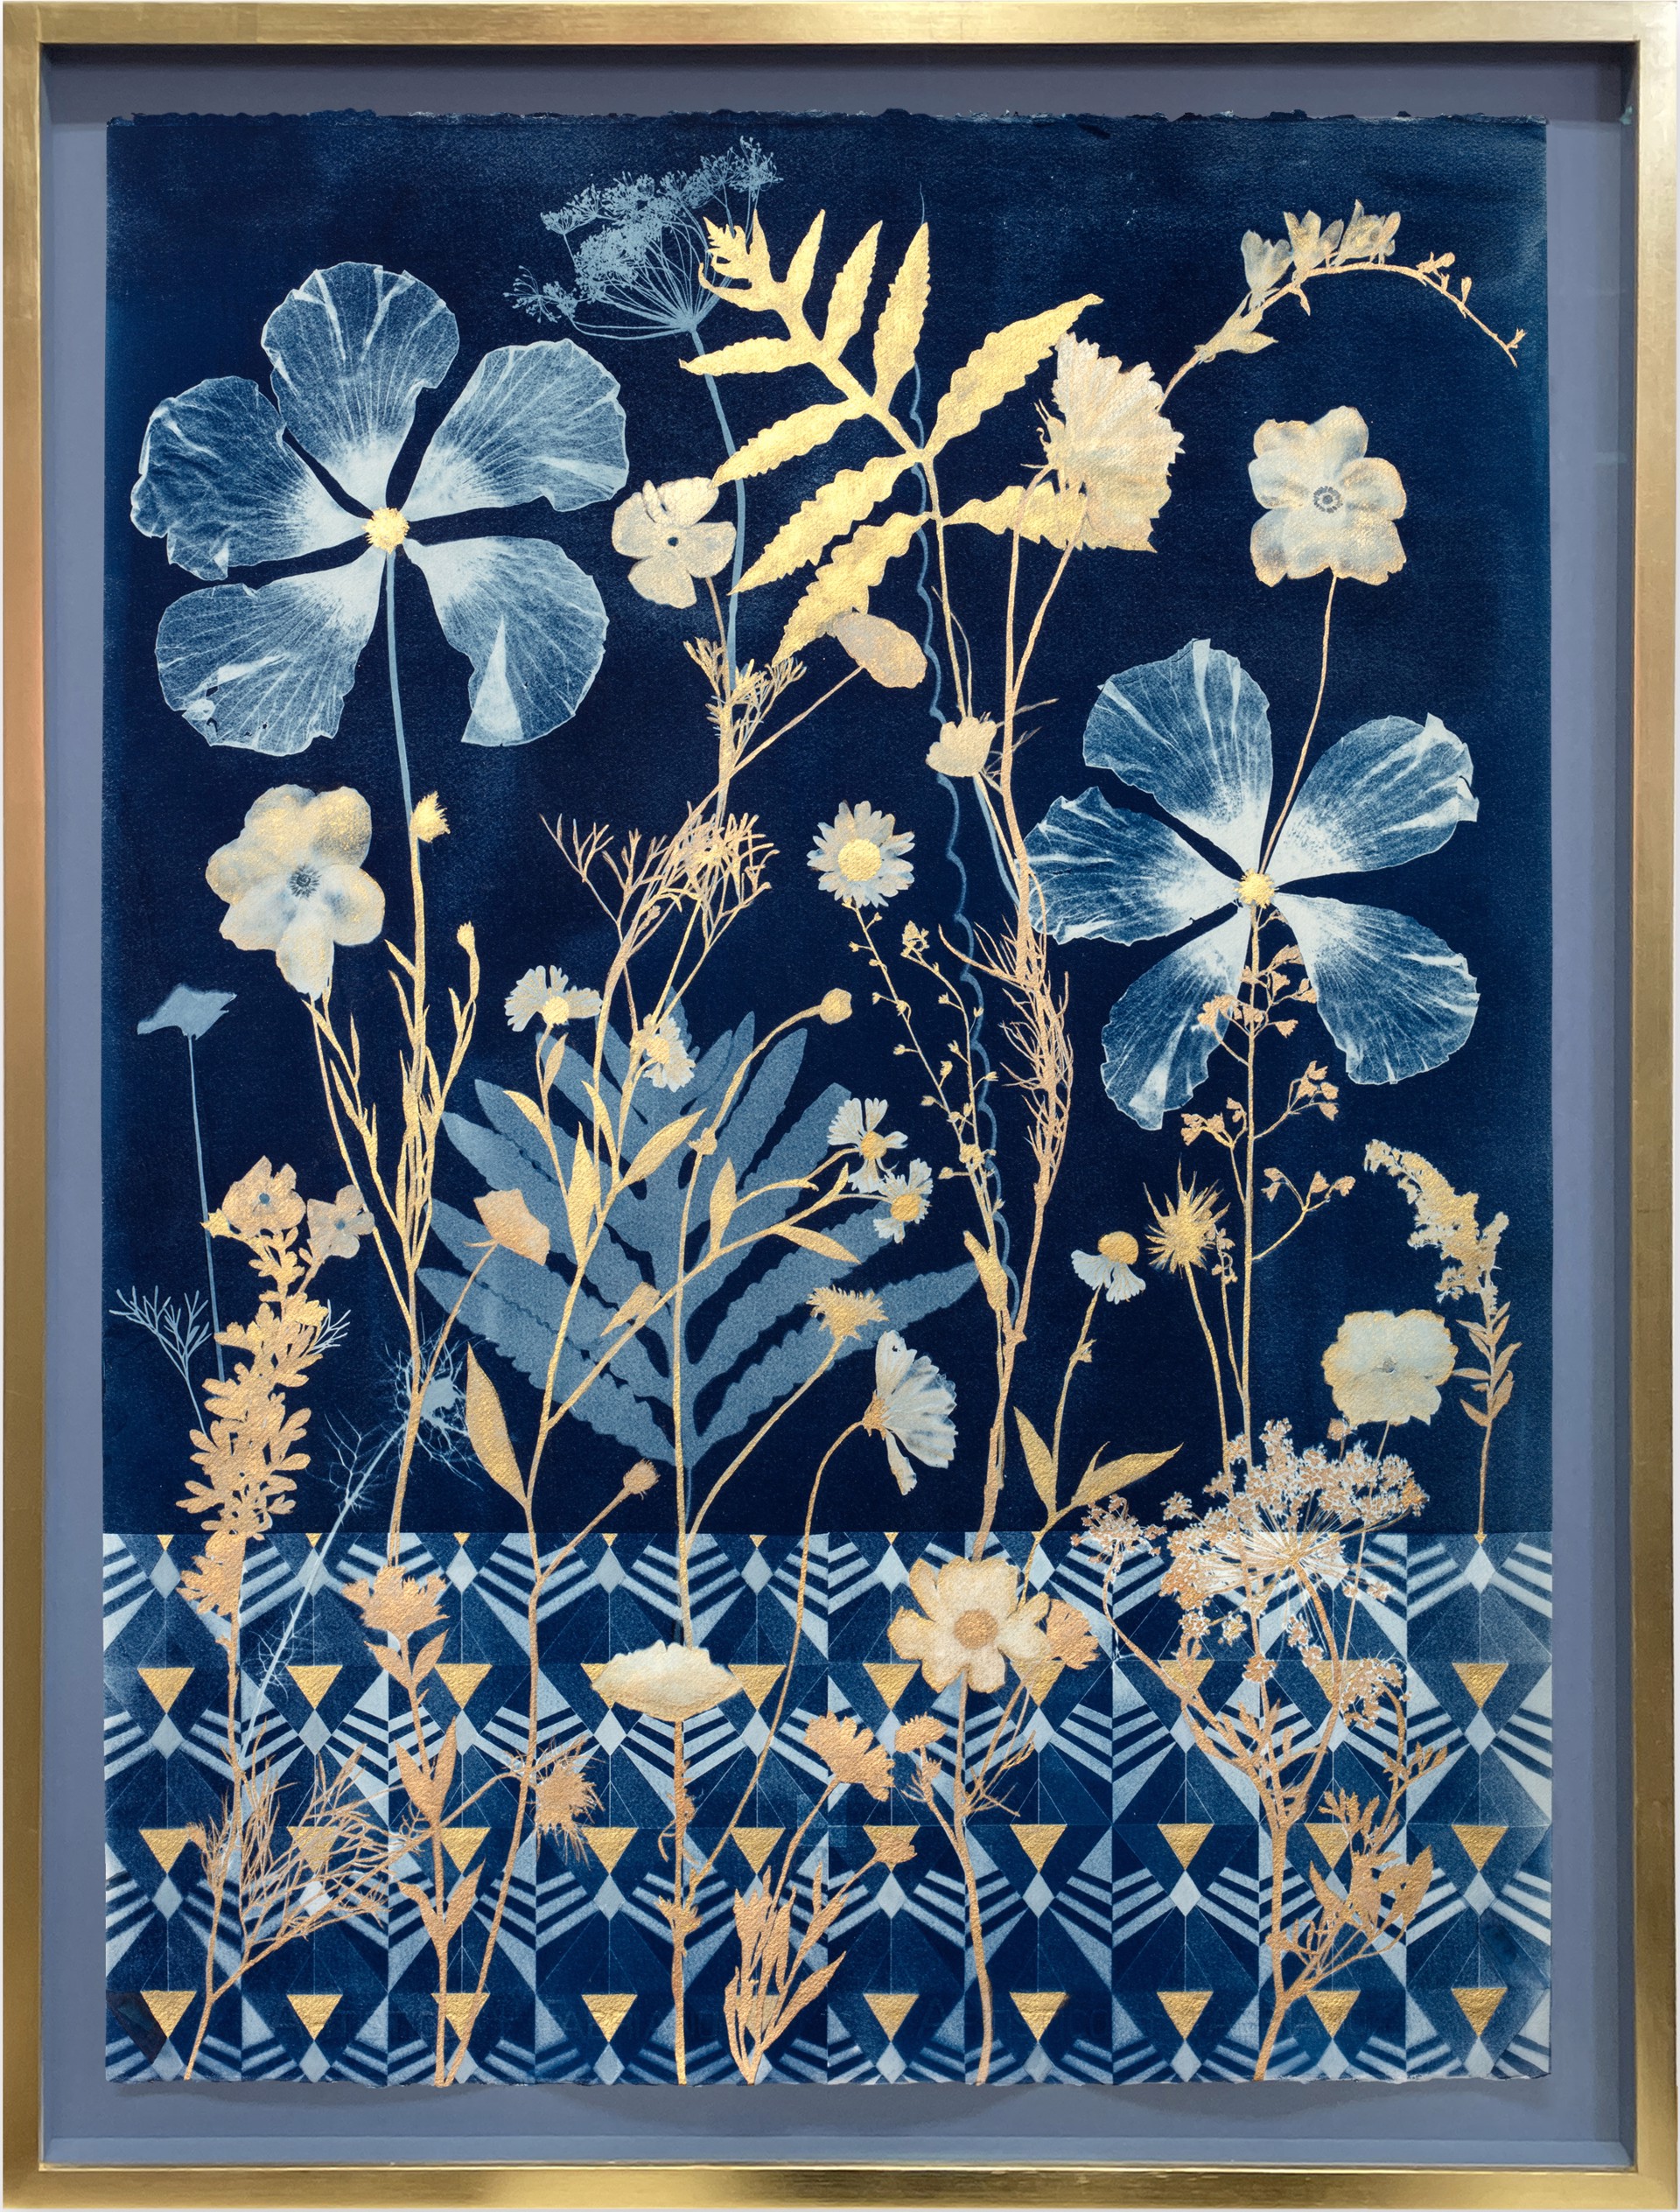 Cyanotype Painting (Gold Hibiscus, Daisies, Cosmos, Fern, Floor Pattern) by Julia Whitney Barnes